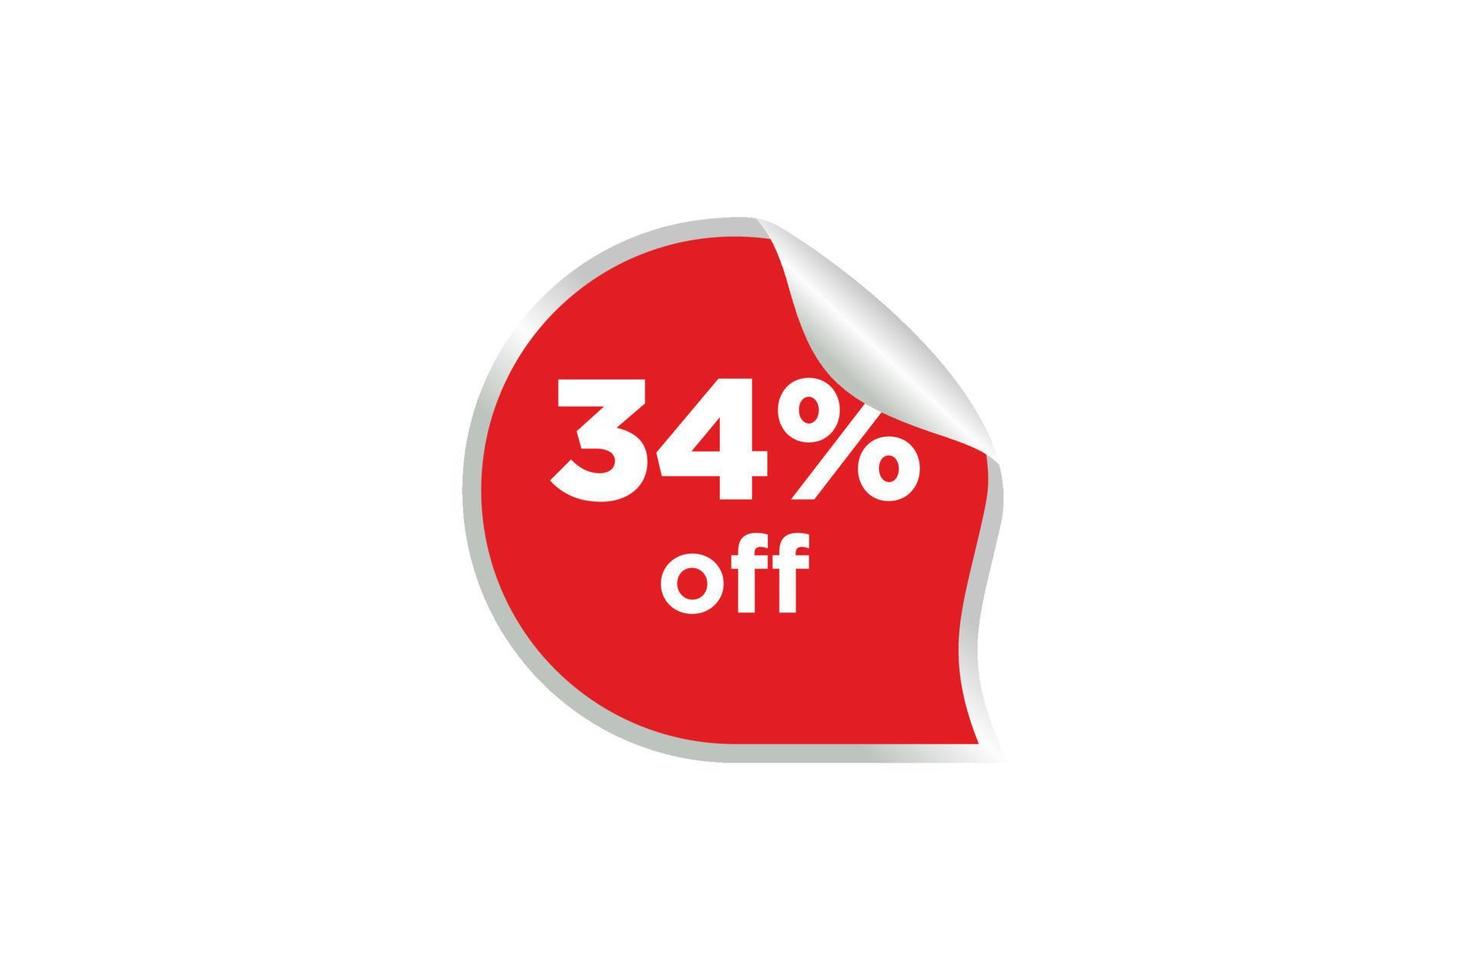 34 discount, Sales Vector badges for Labels, , Stickers, Banners, Tags, Web Stickers, New offer. Discount origami sign banner.